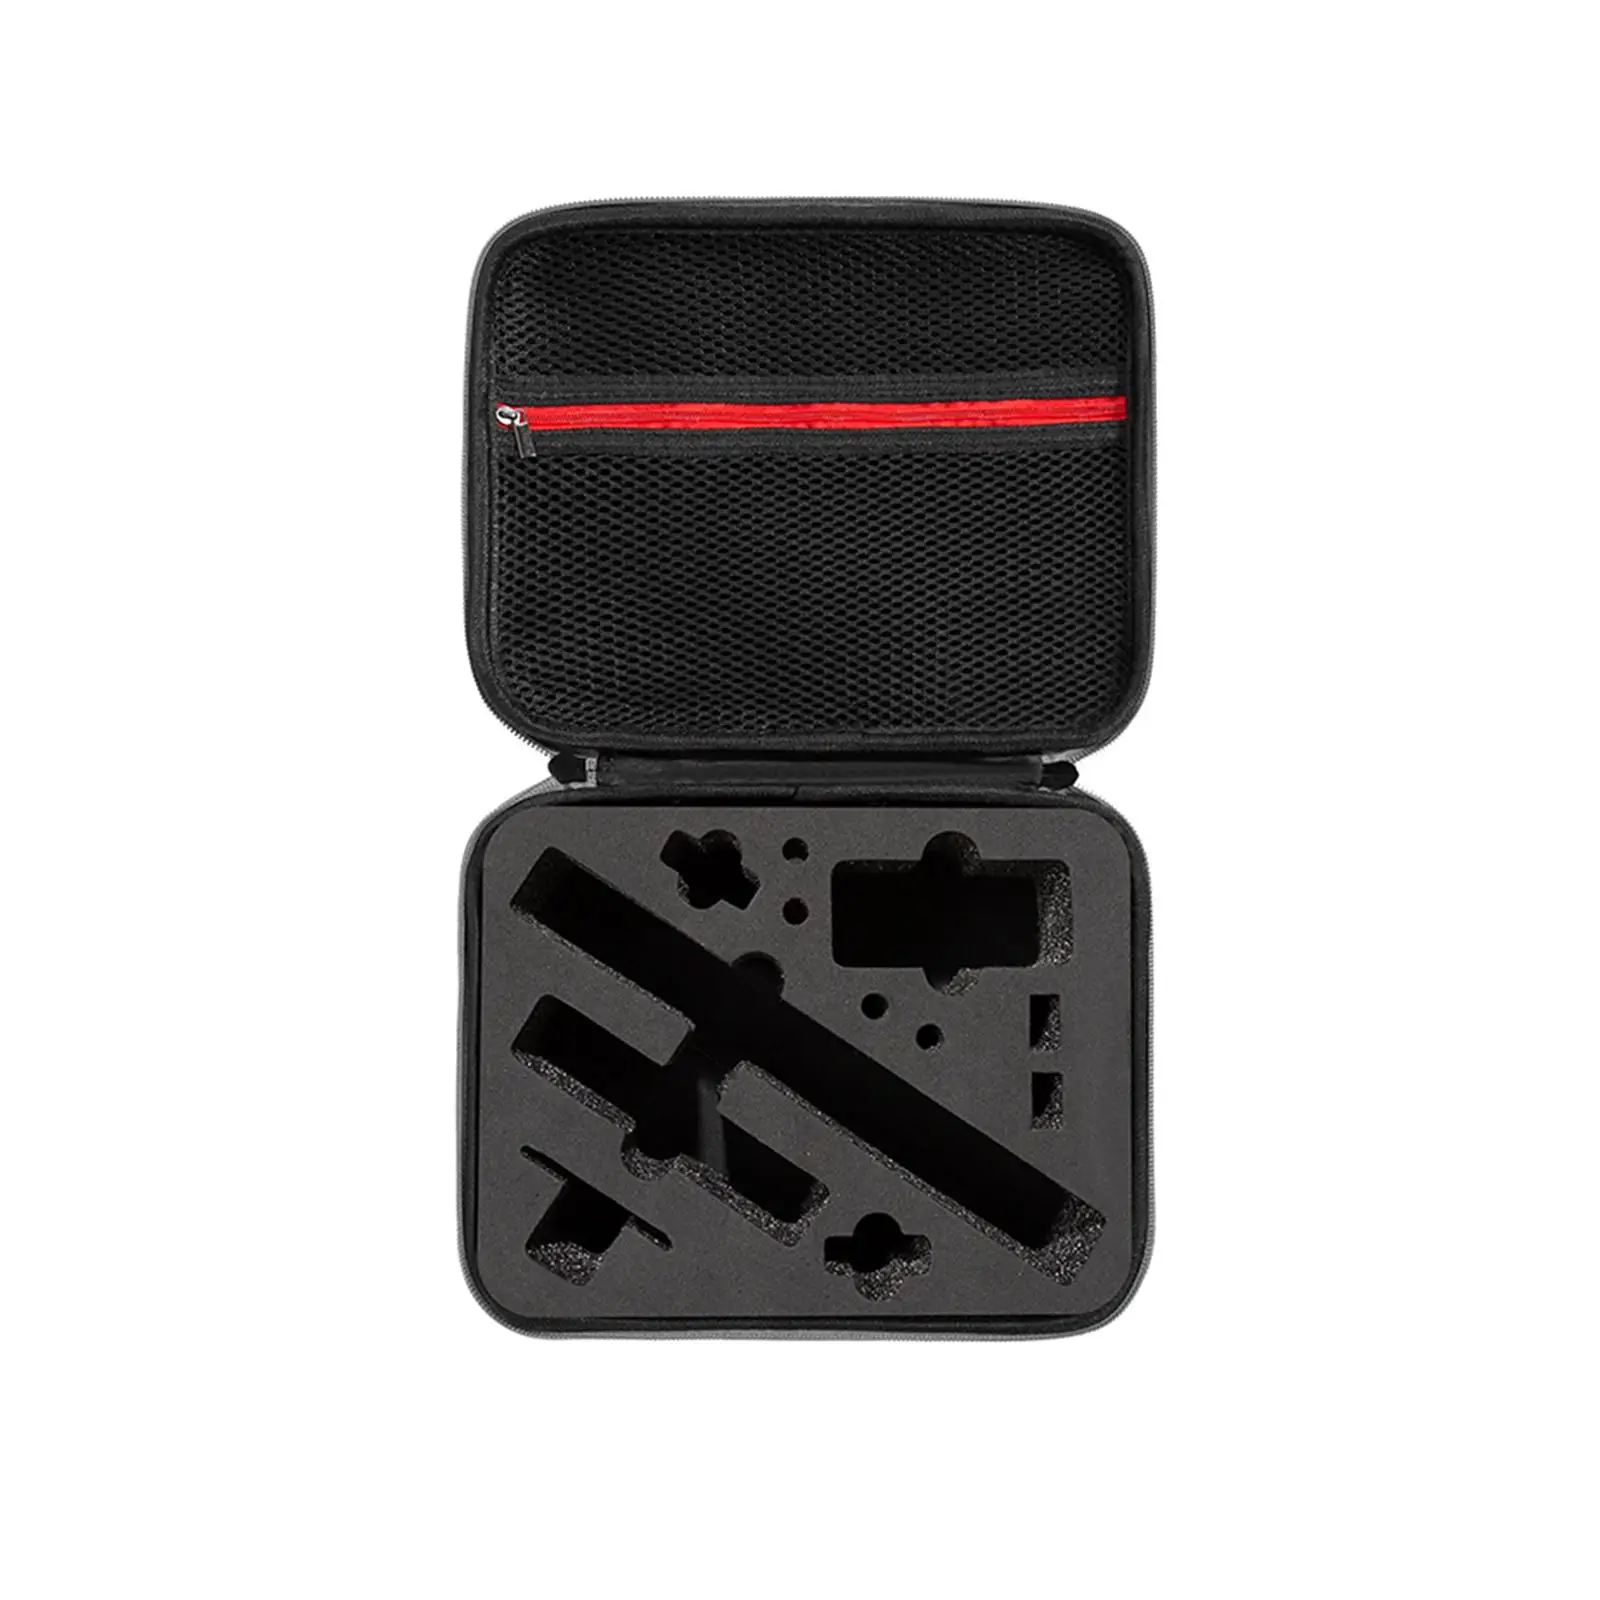 Handheld Storage Box Hard Shell Simple Shockproof Carrying Case for 3